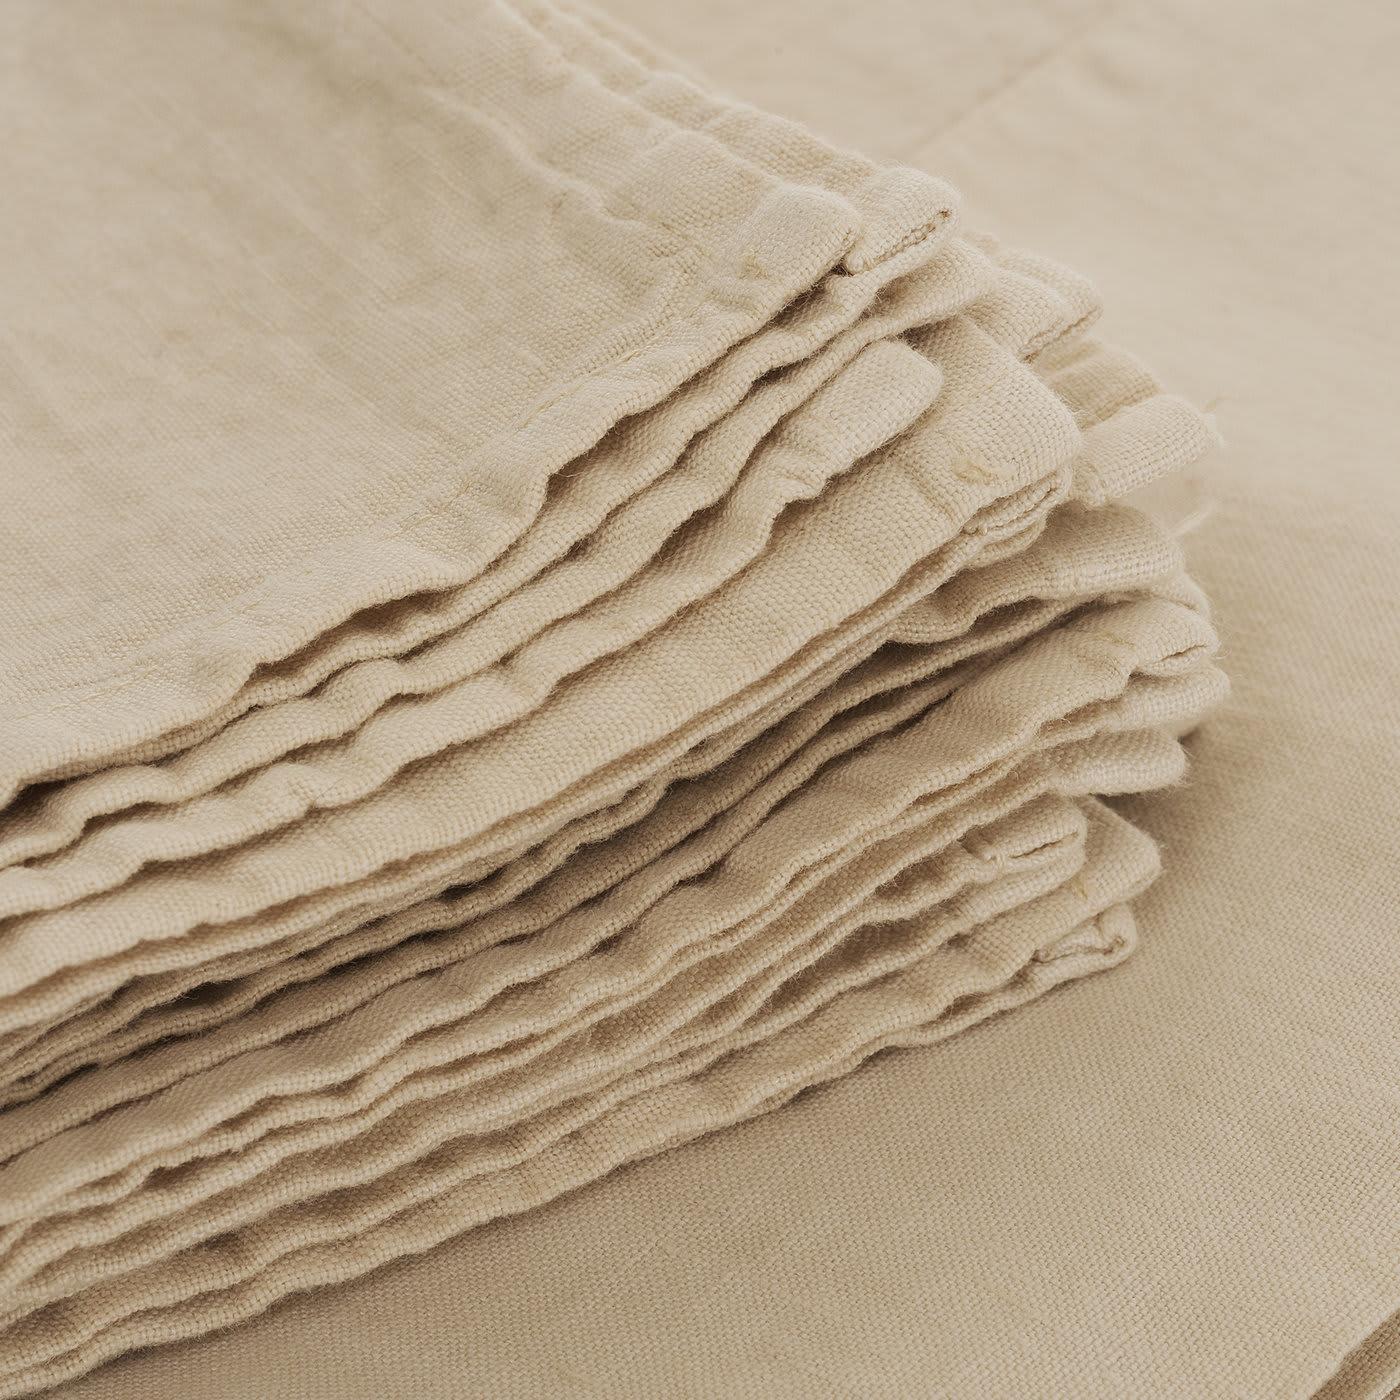 Timeless sophistication and the understated elegance of high-quality pieces distinguish this superb set of tablecloth and twelve napkins. Entirely made by hand, this set is in a delicate beige shade that will complement both a classic and a modern